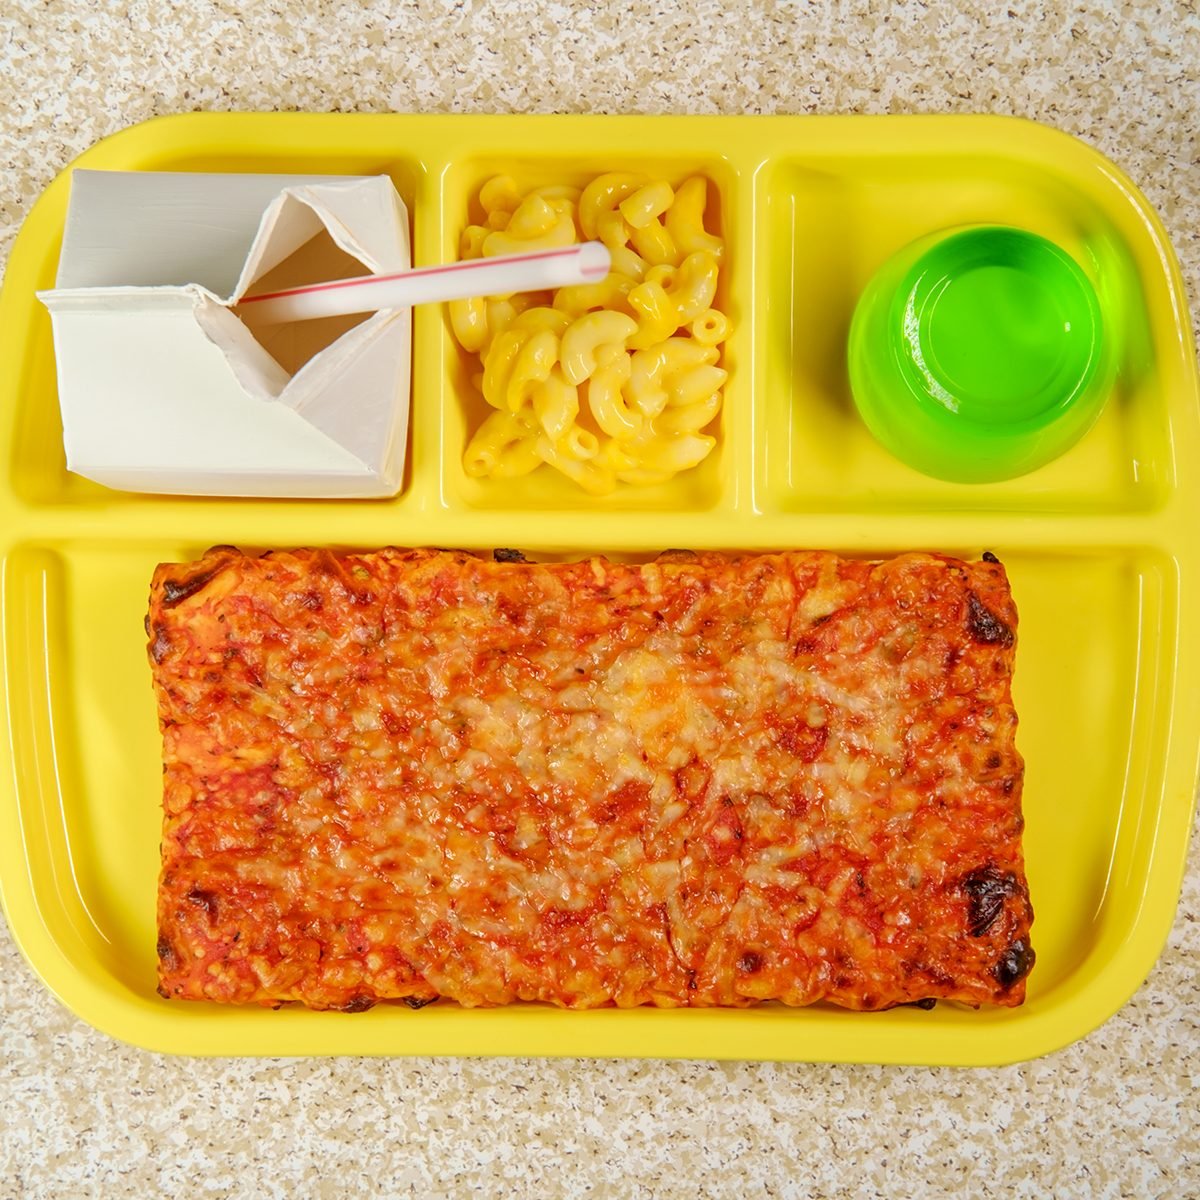 Placing local food on school lunch trays